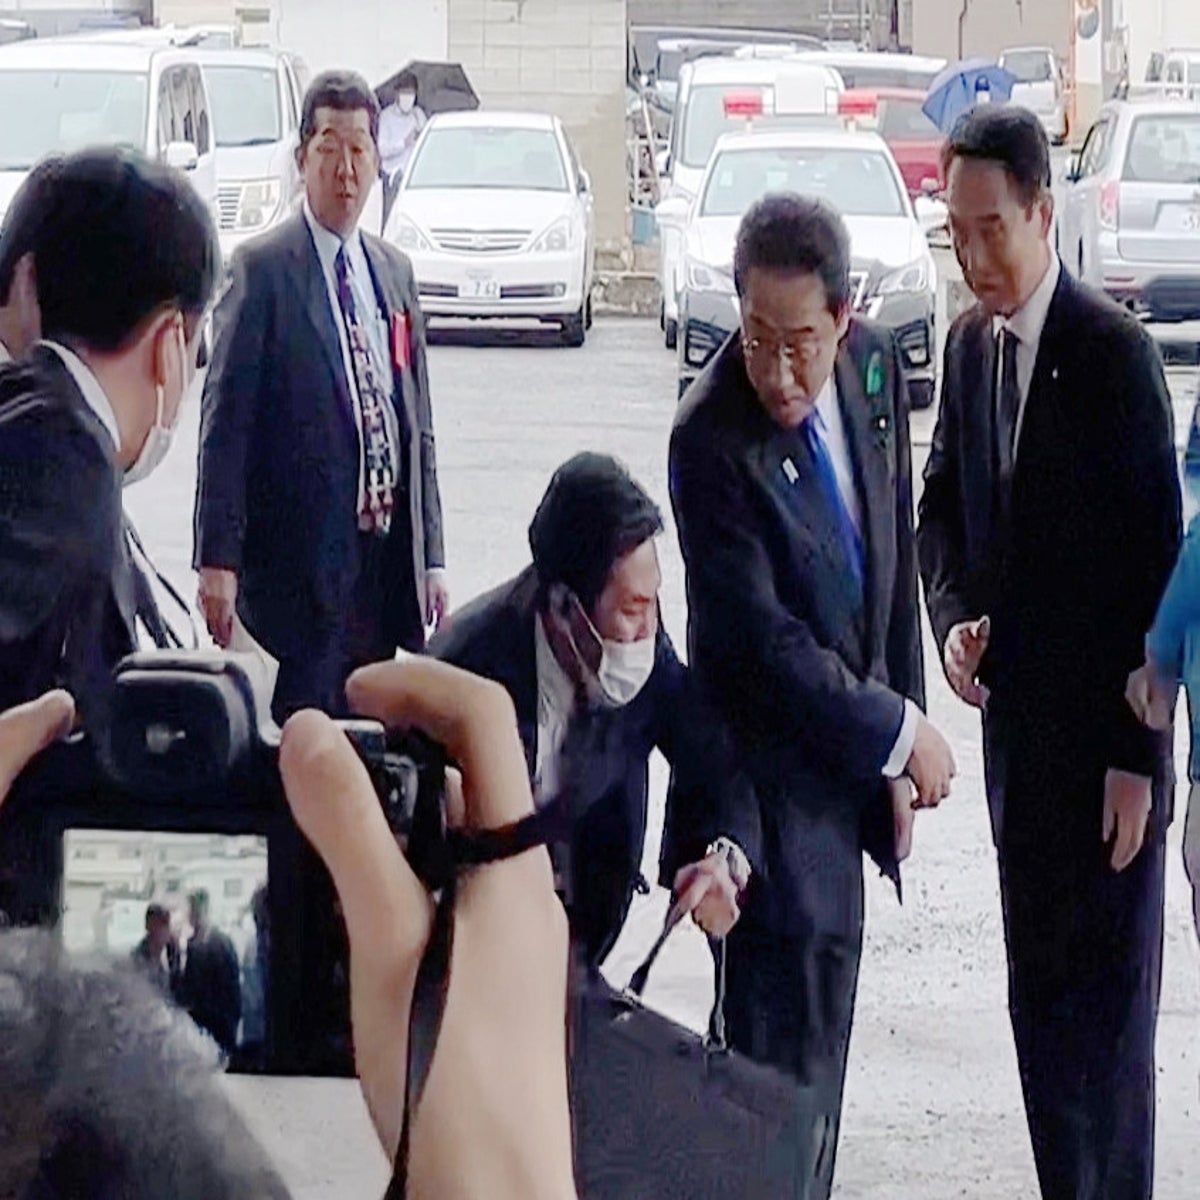 Video shows actions of 'quick-thinking' bodyguard who kicked pipe bomb away  from Japanese PM